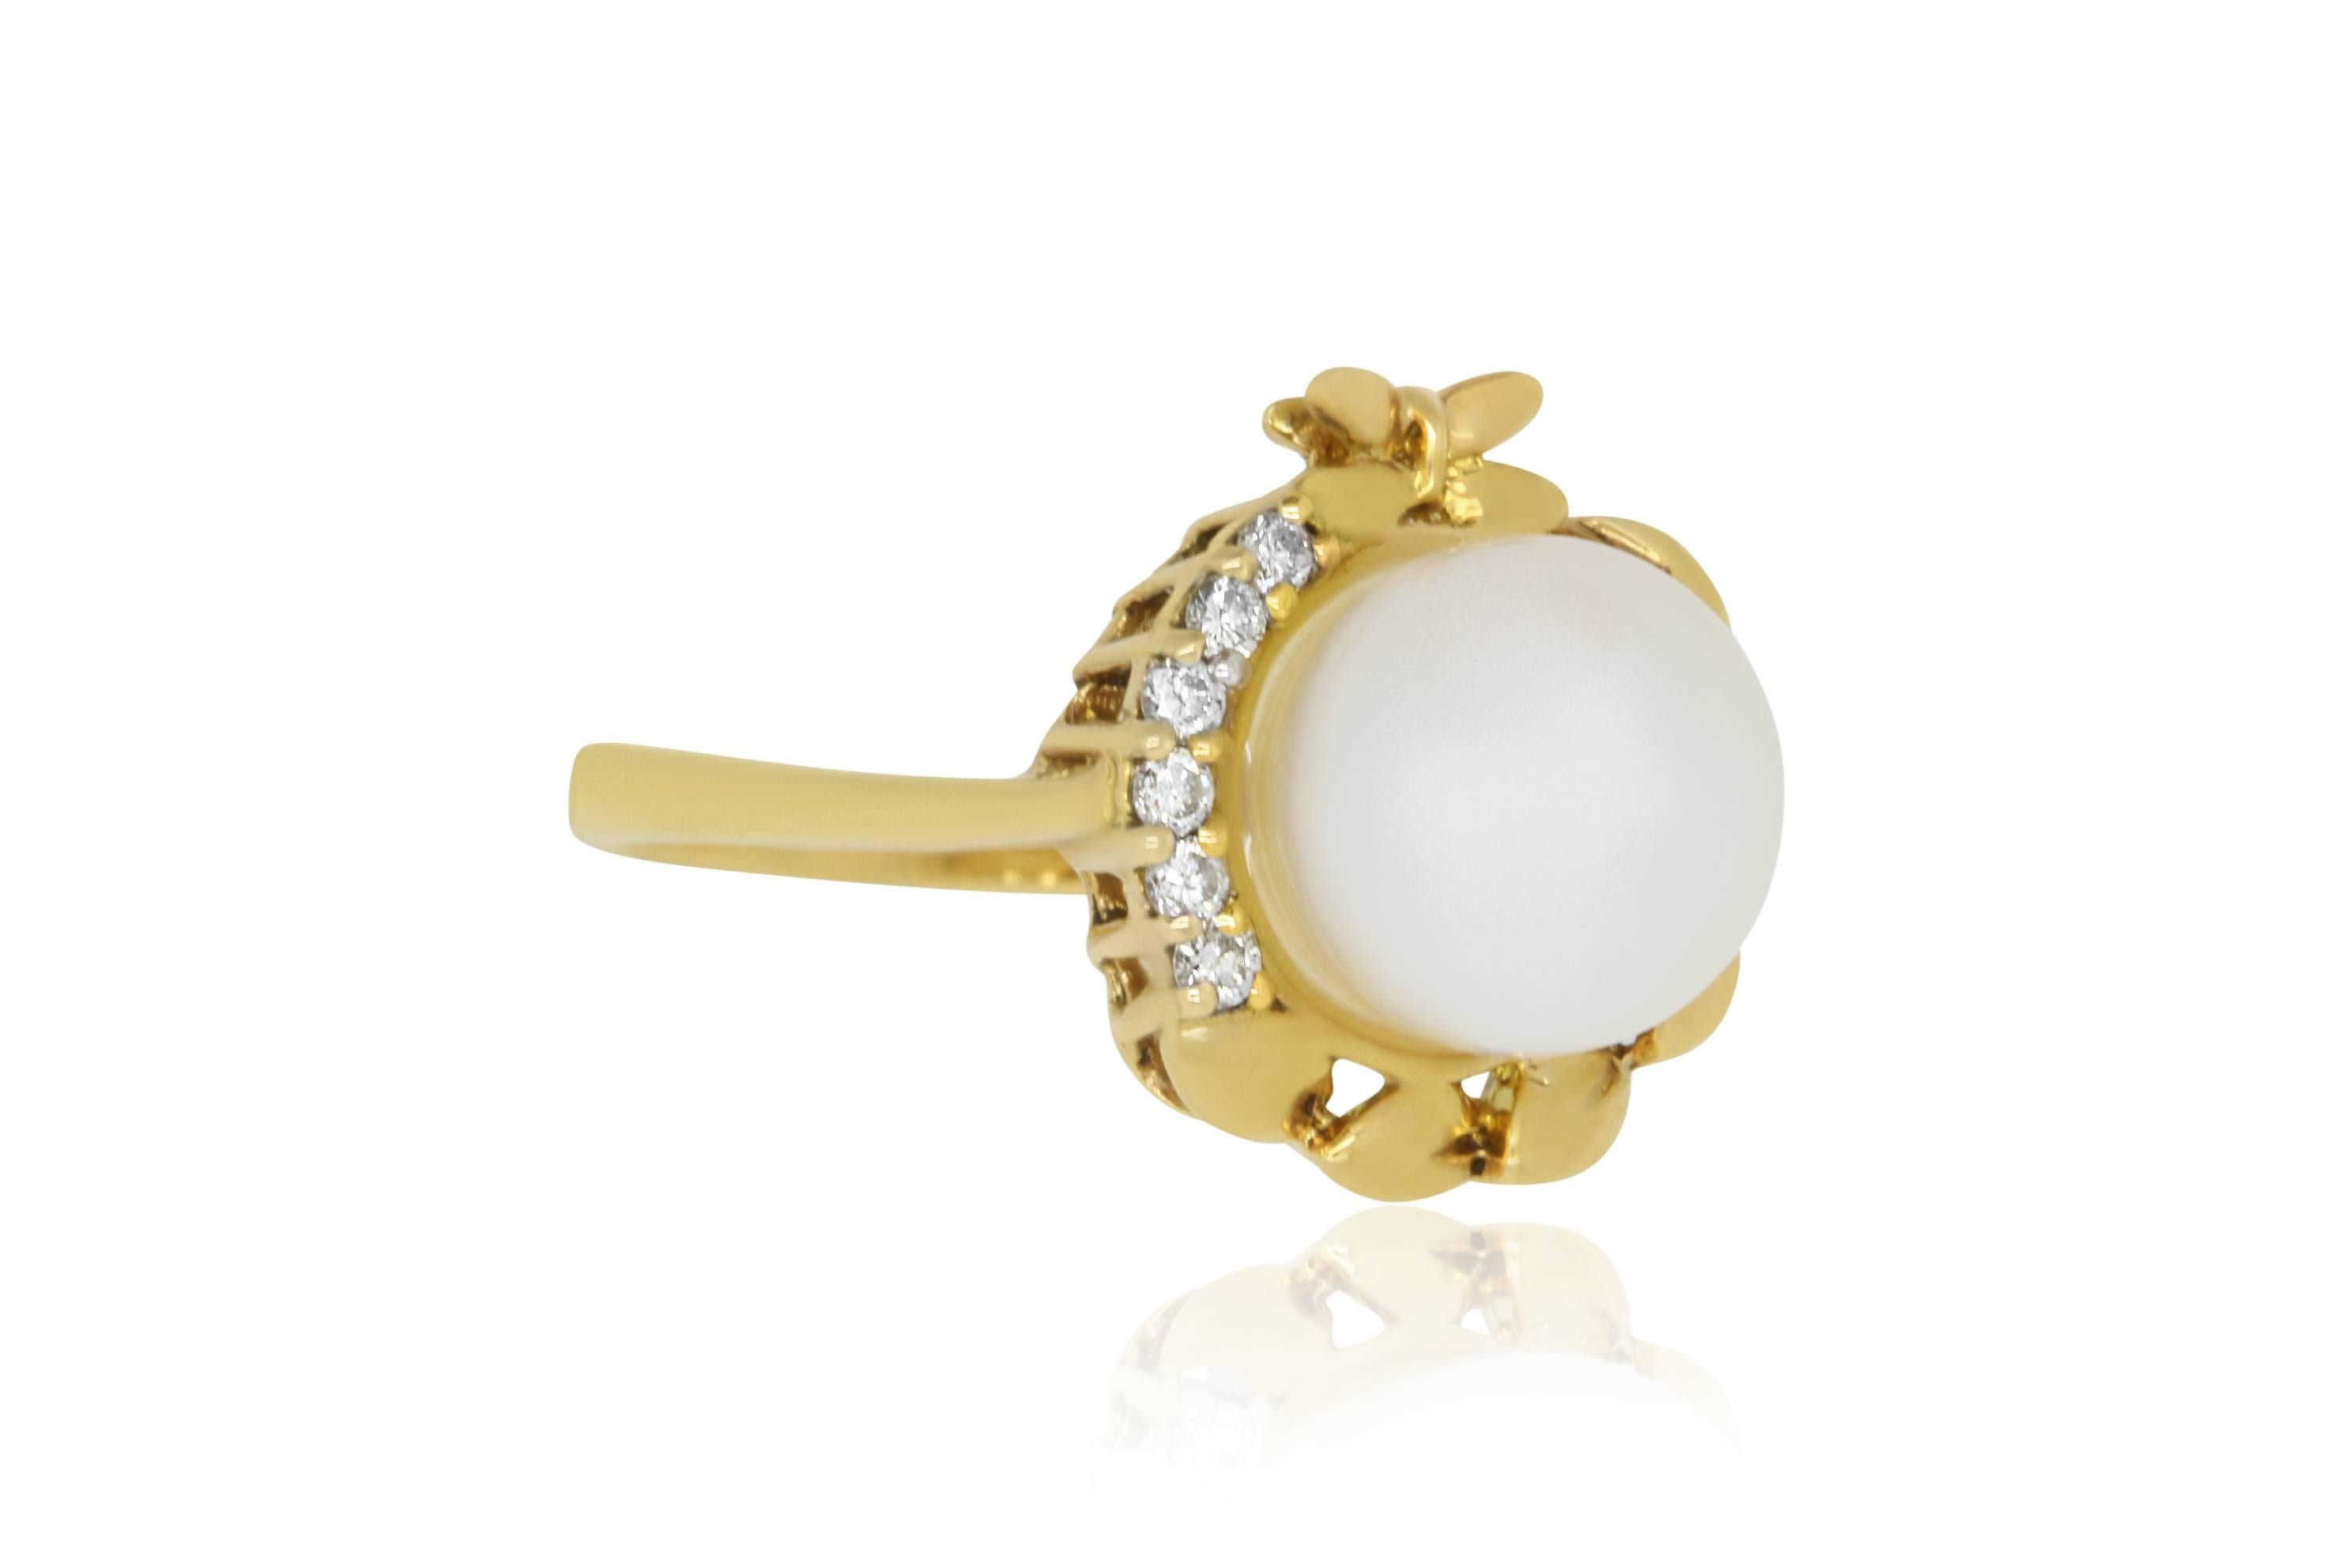 Material: 18k Yellow Gold 
Center Stone Details: 1.01 Carat Pearl 
Mounting Diamond Details: Brilliant Round White Diamonds Approximately 0.09 Carats - Clarity: VS-SI / Color: H-I
This piece measures approximately 14 millimeters.
Ring Size: Size